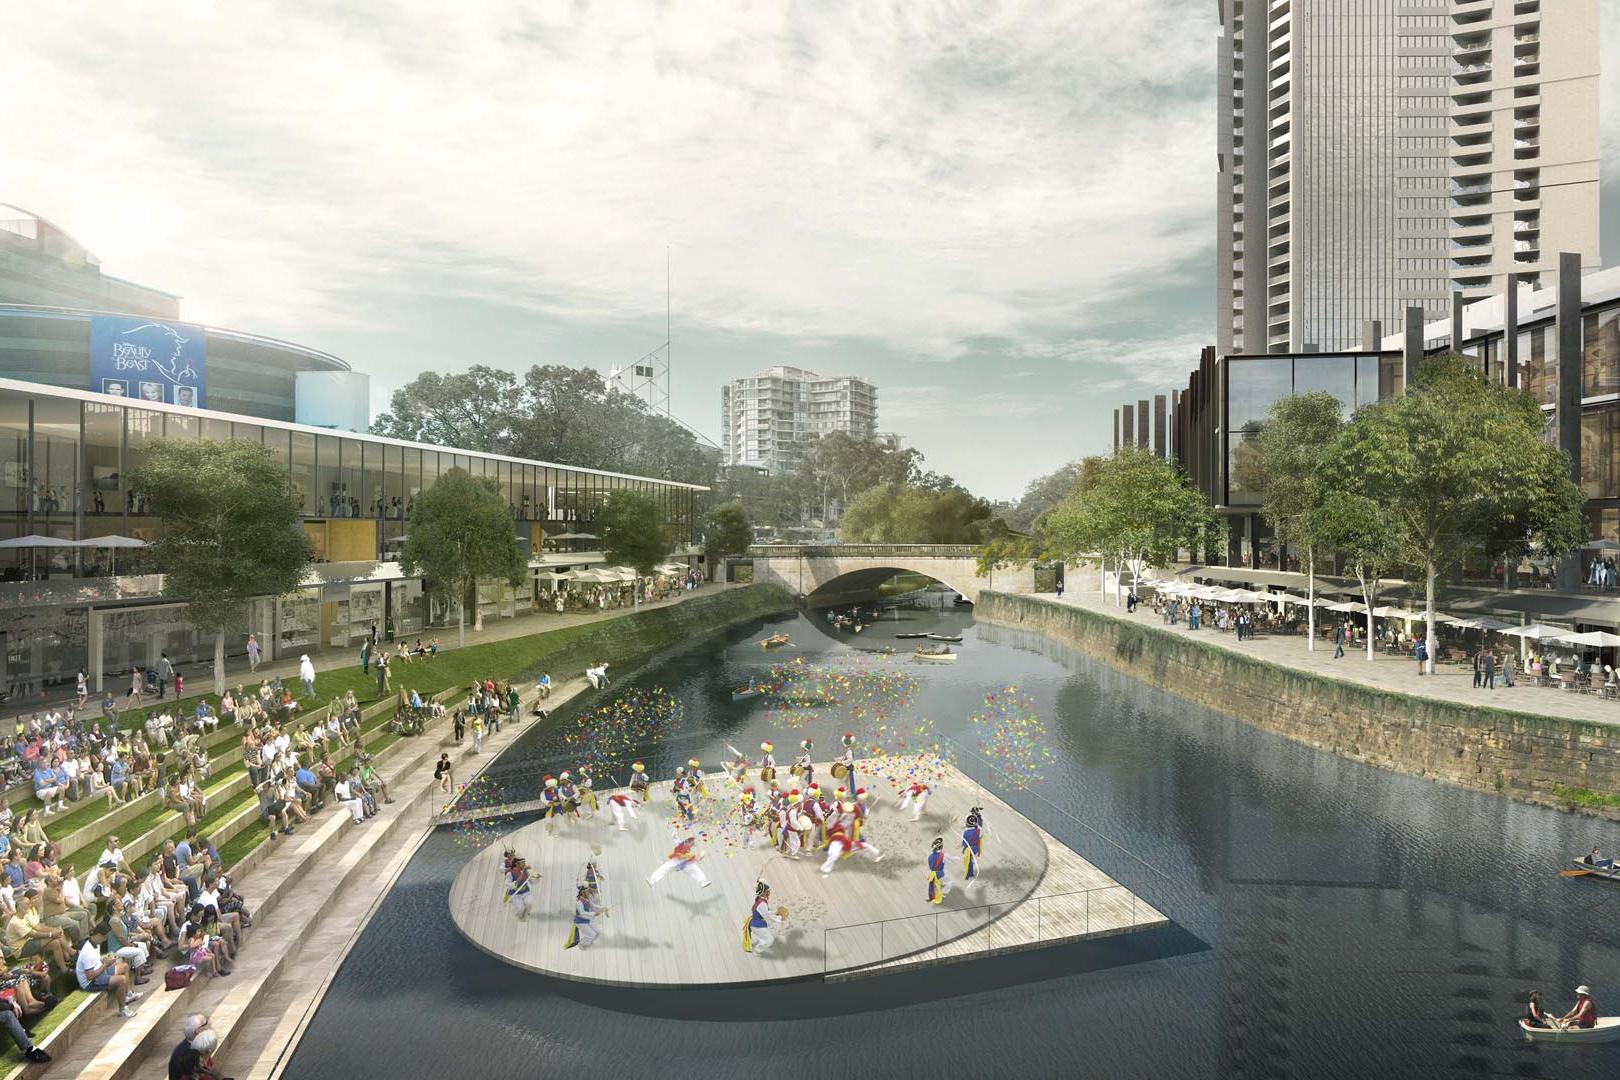 The Parramatta River Strategy is a plan for revitalising the foreshore of the Parramatta River between Gasworks Bridge and Rings Bridge, O’Connell Street.